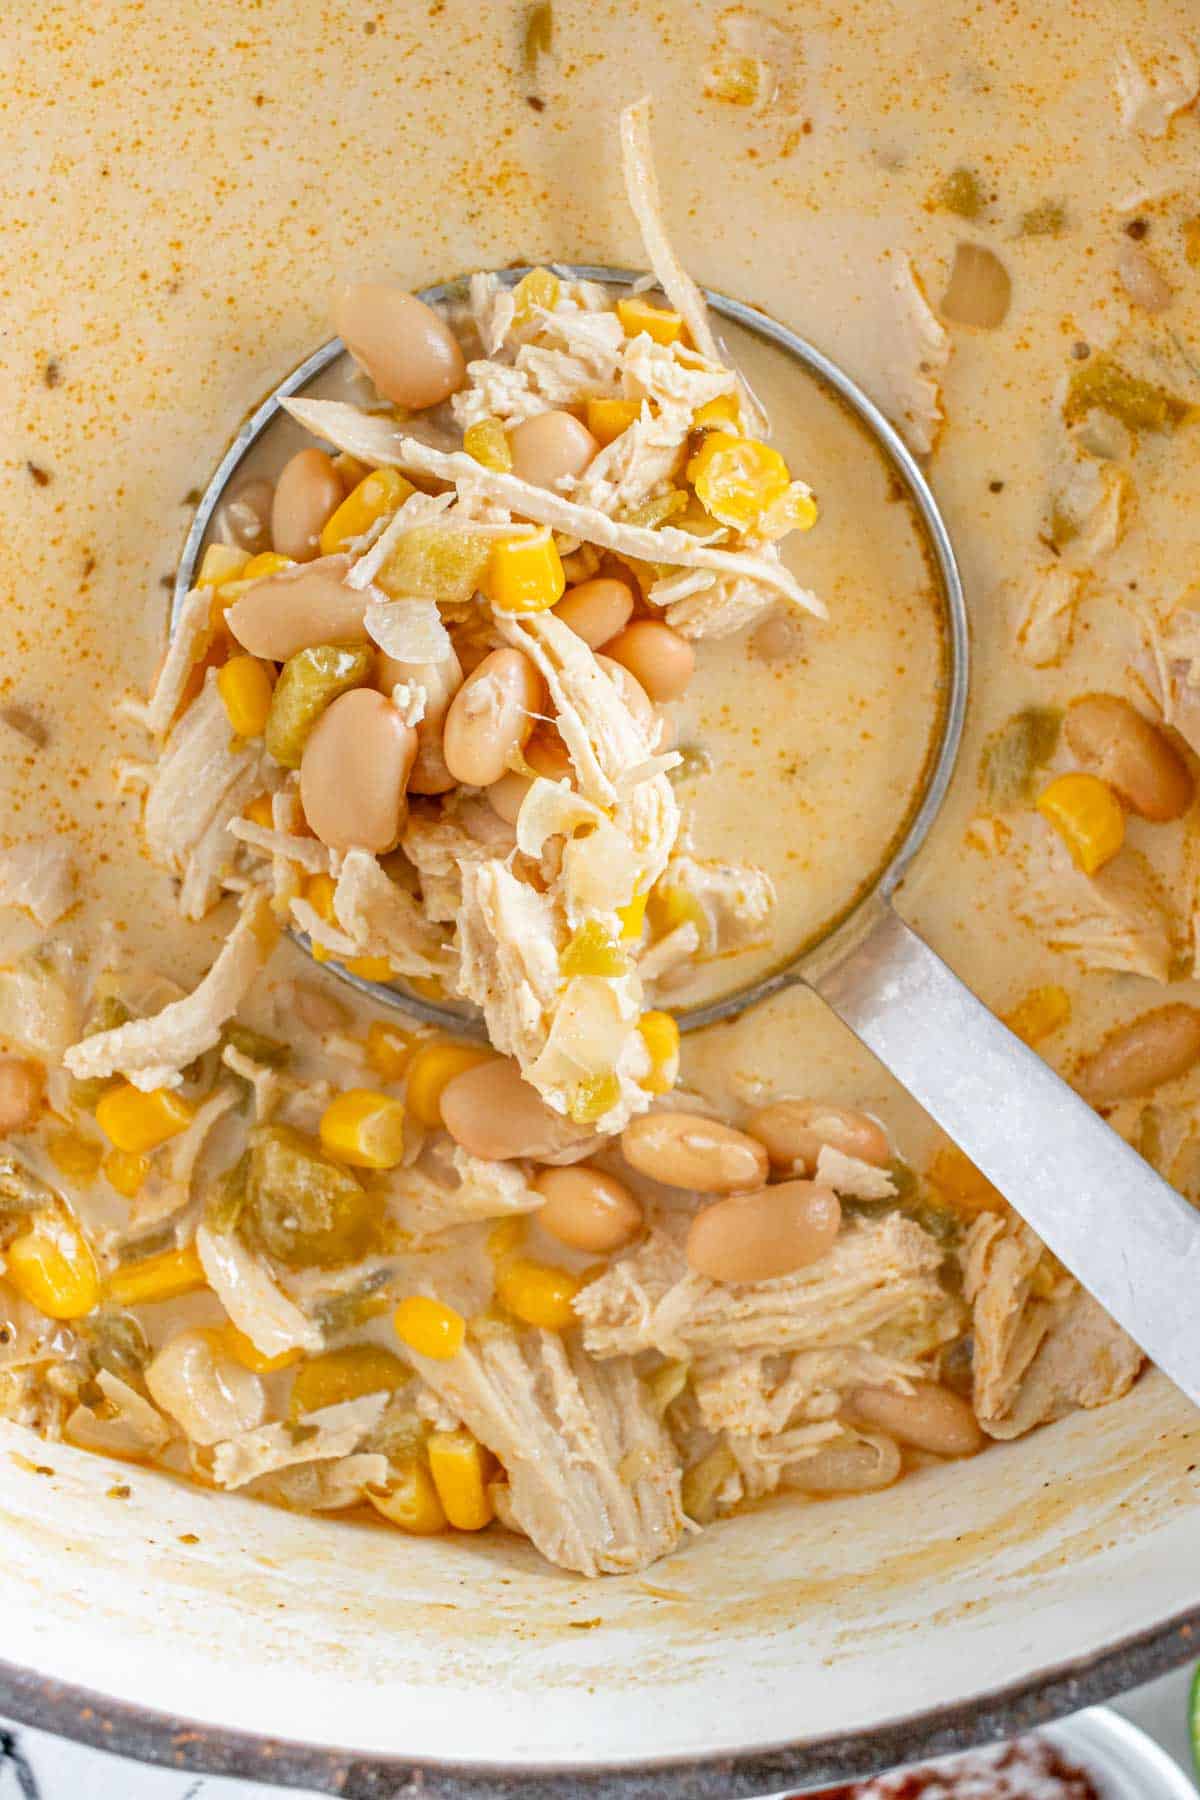 A ladle scooping white chicken chili with corn and beans from a pot.